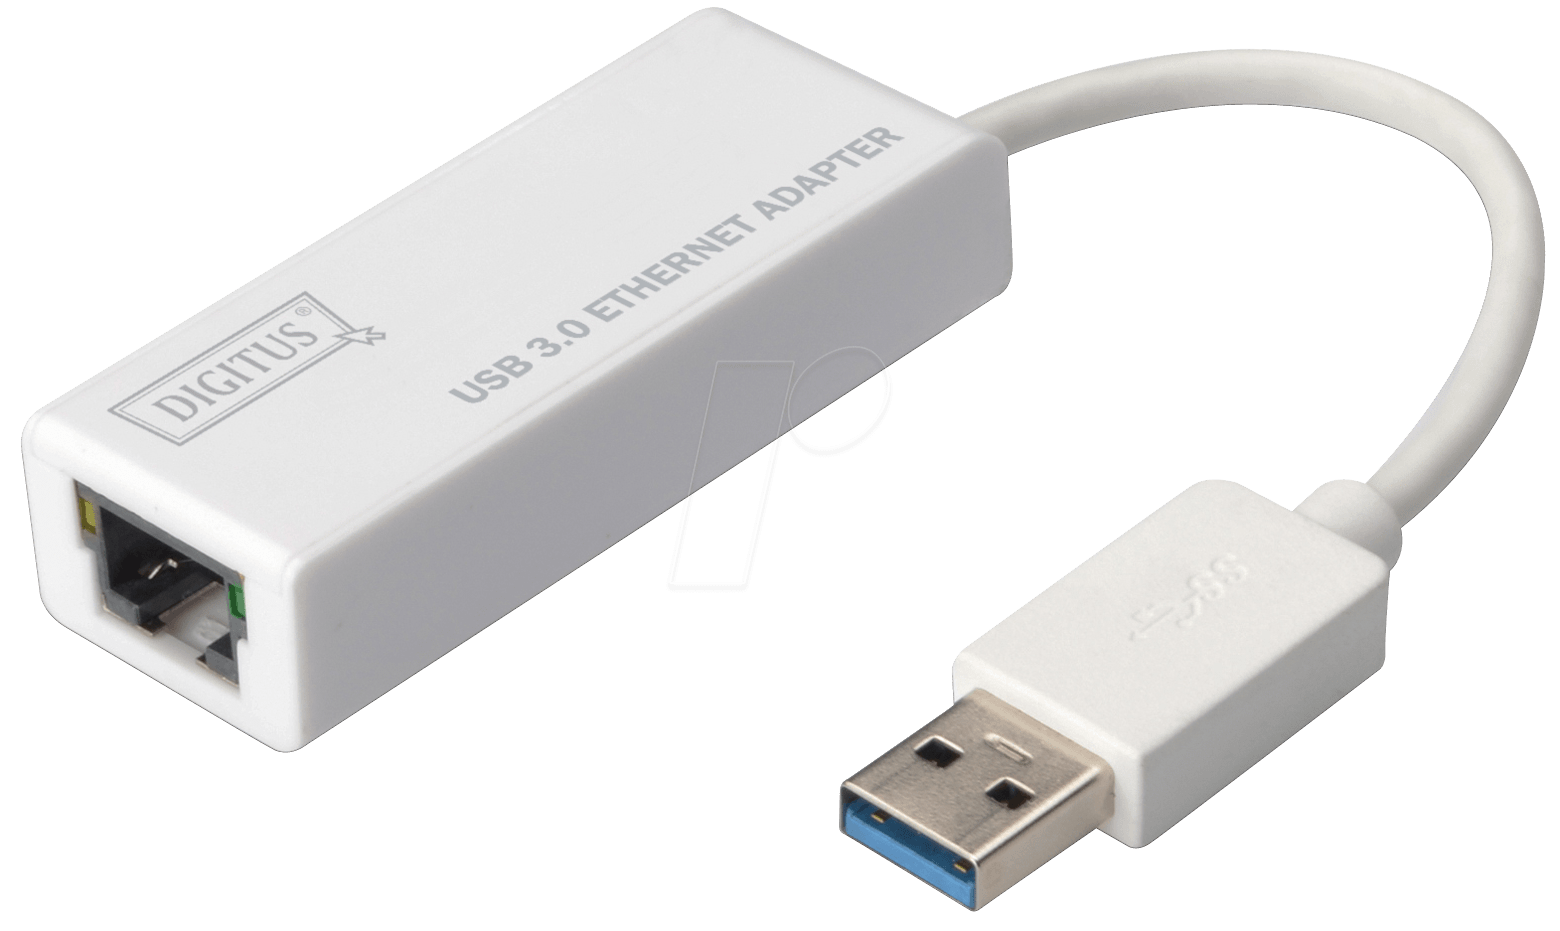 download driver ch9200 usb ethernet adapter